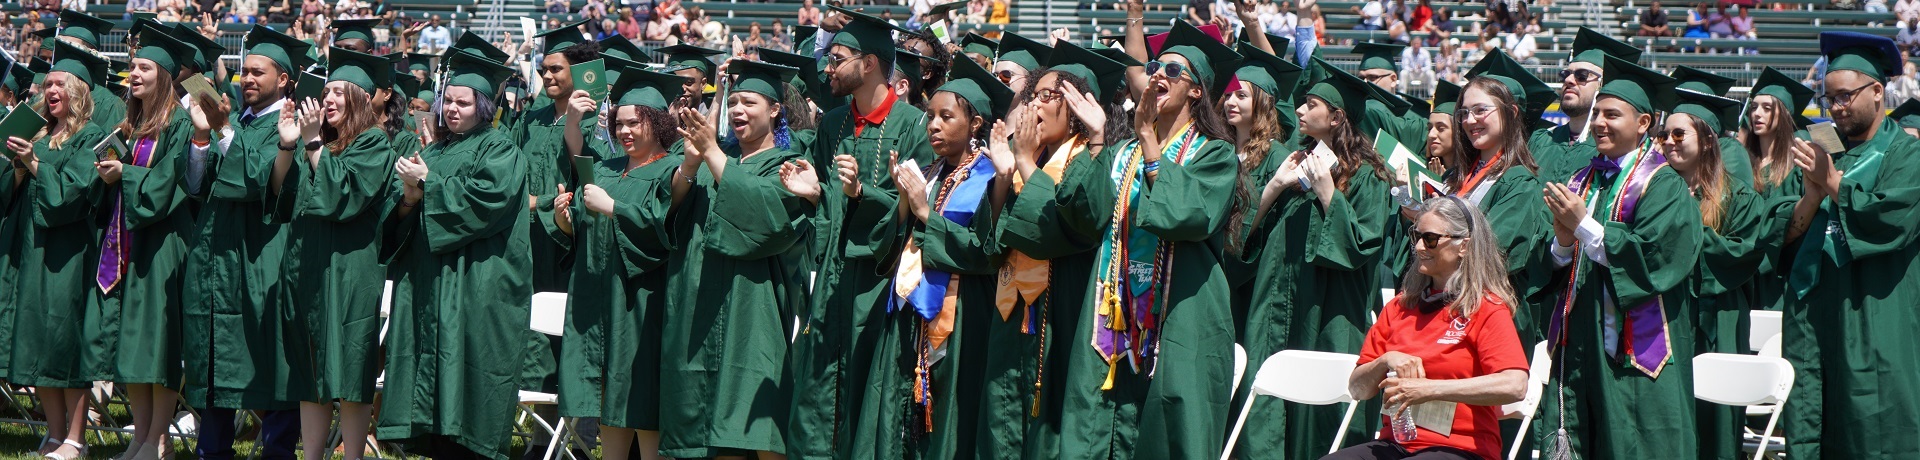 graduating students at commencement